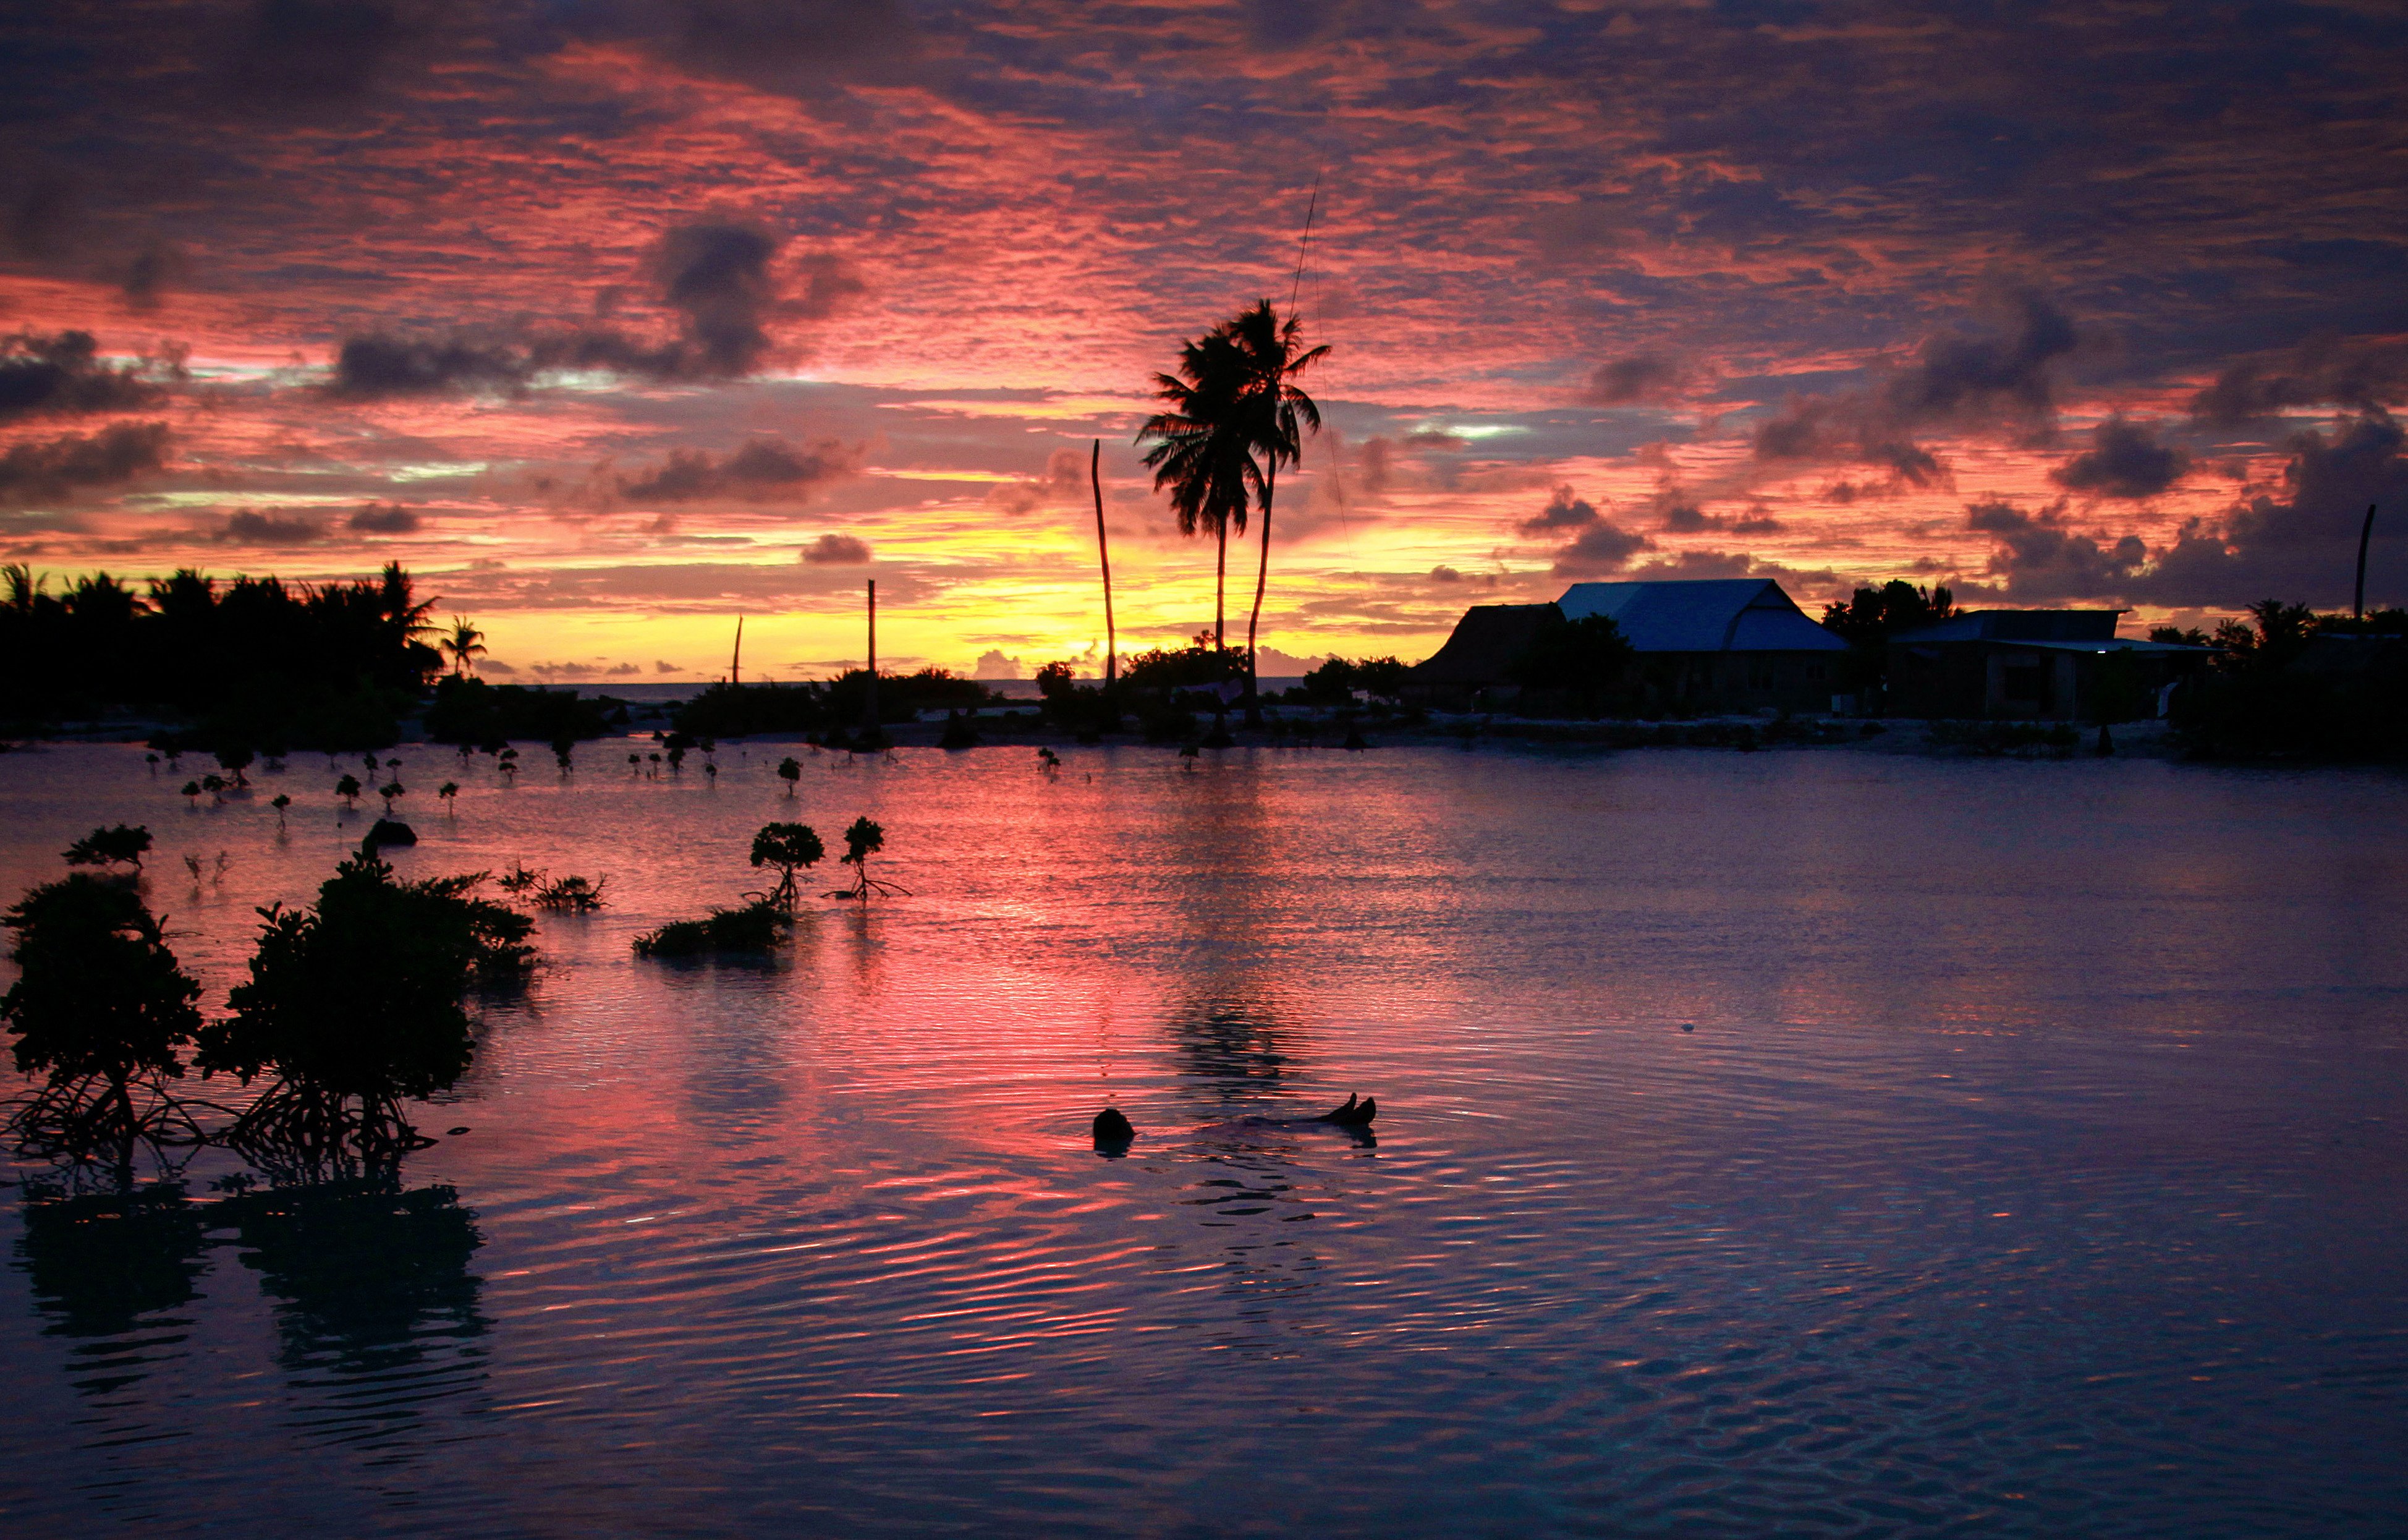 Kiribati controls one of the biggest exclusive economic zones in the world. Photo: Getty Images